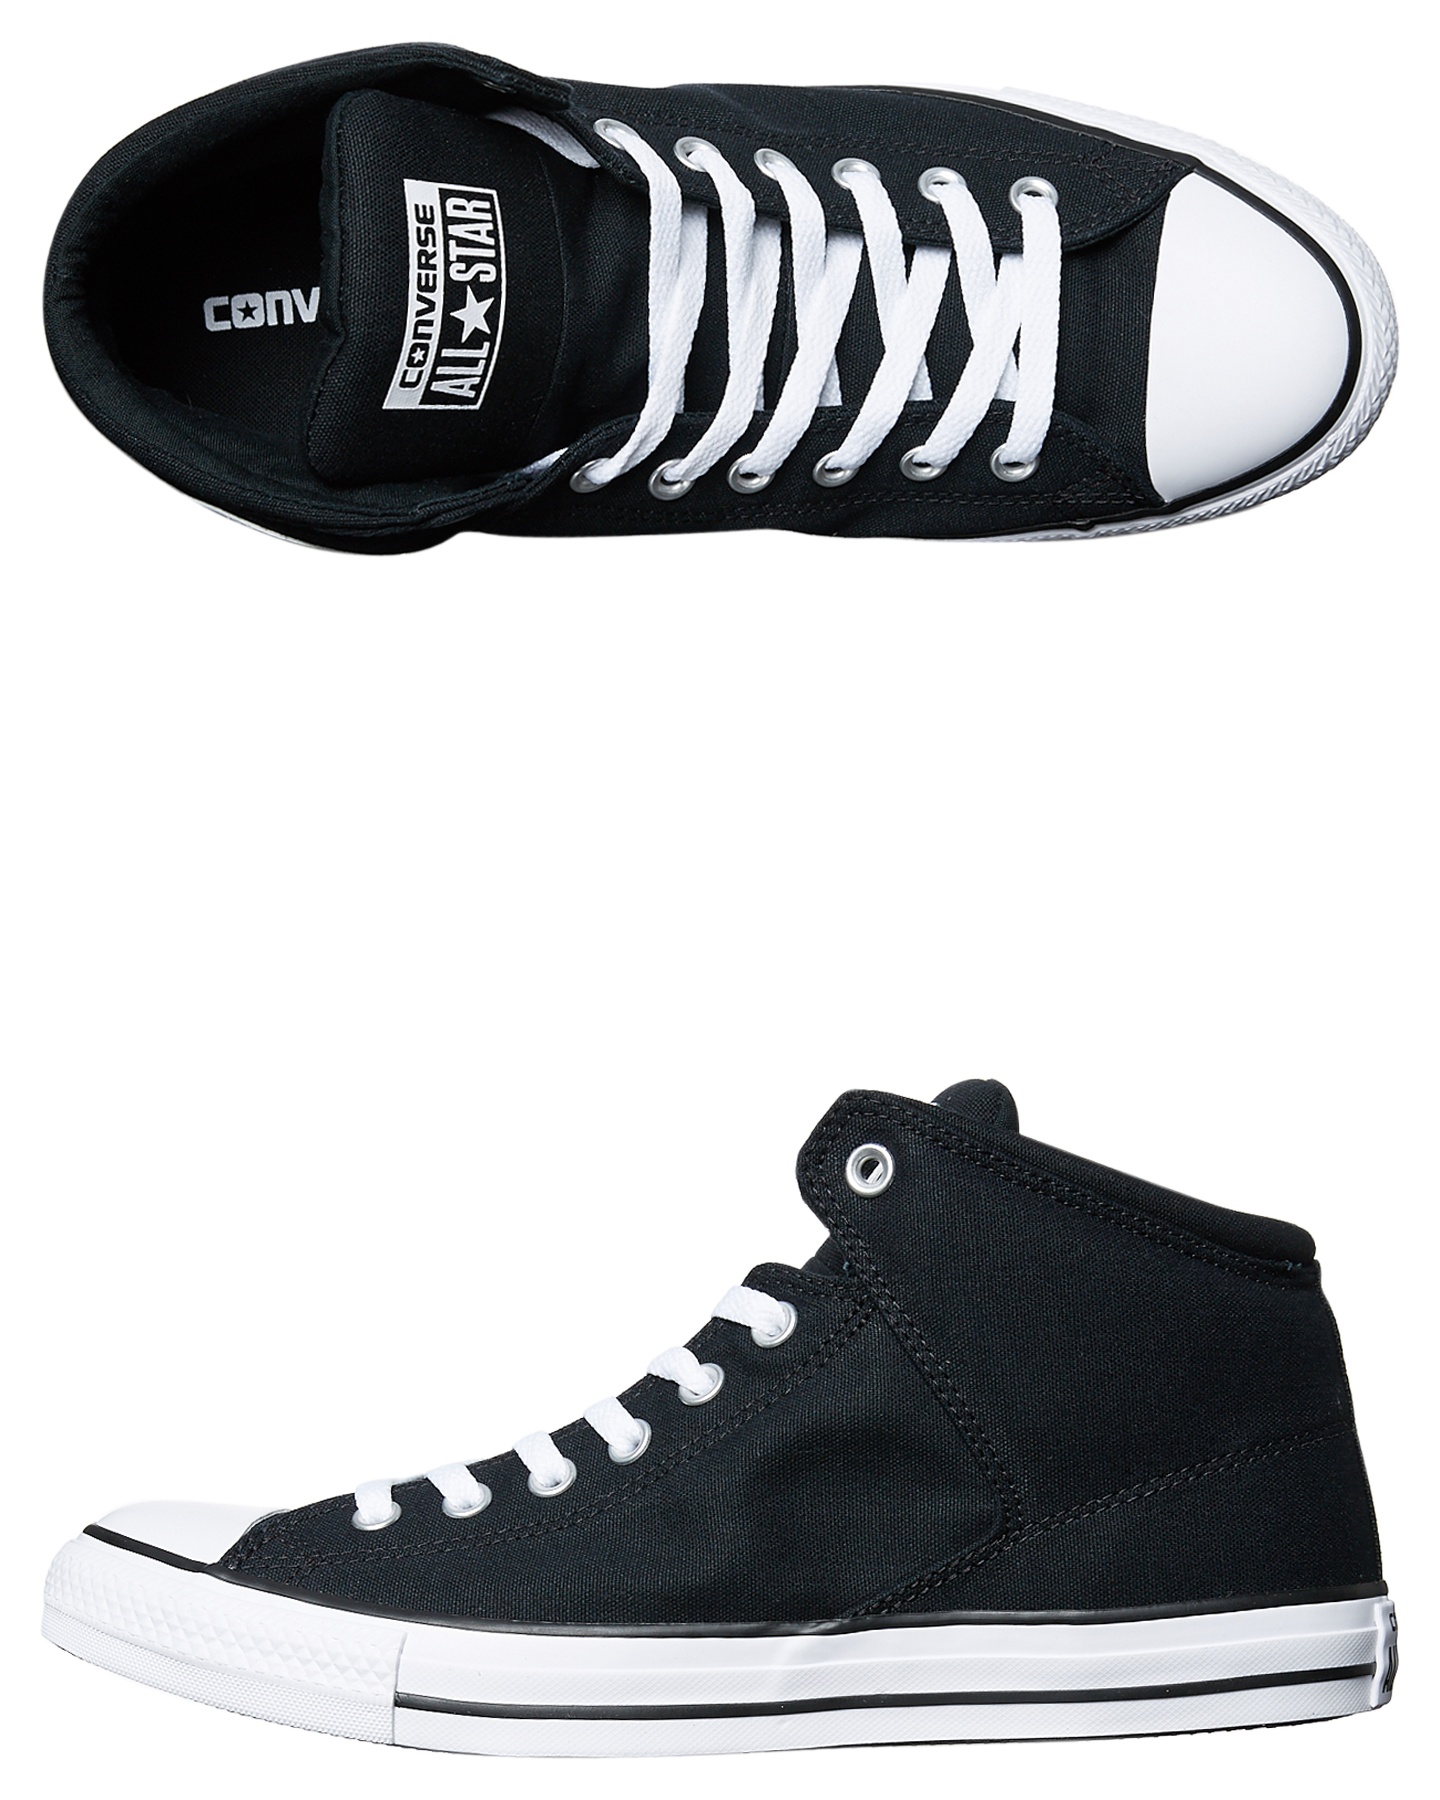 converse high street shoes | Sale OFF-59%